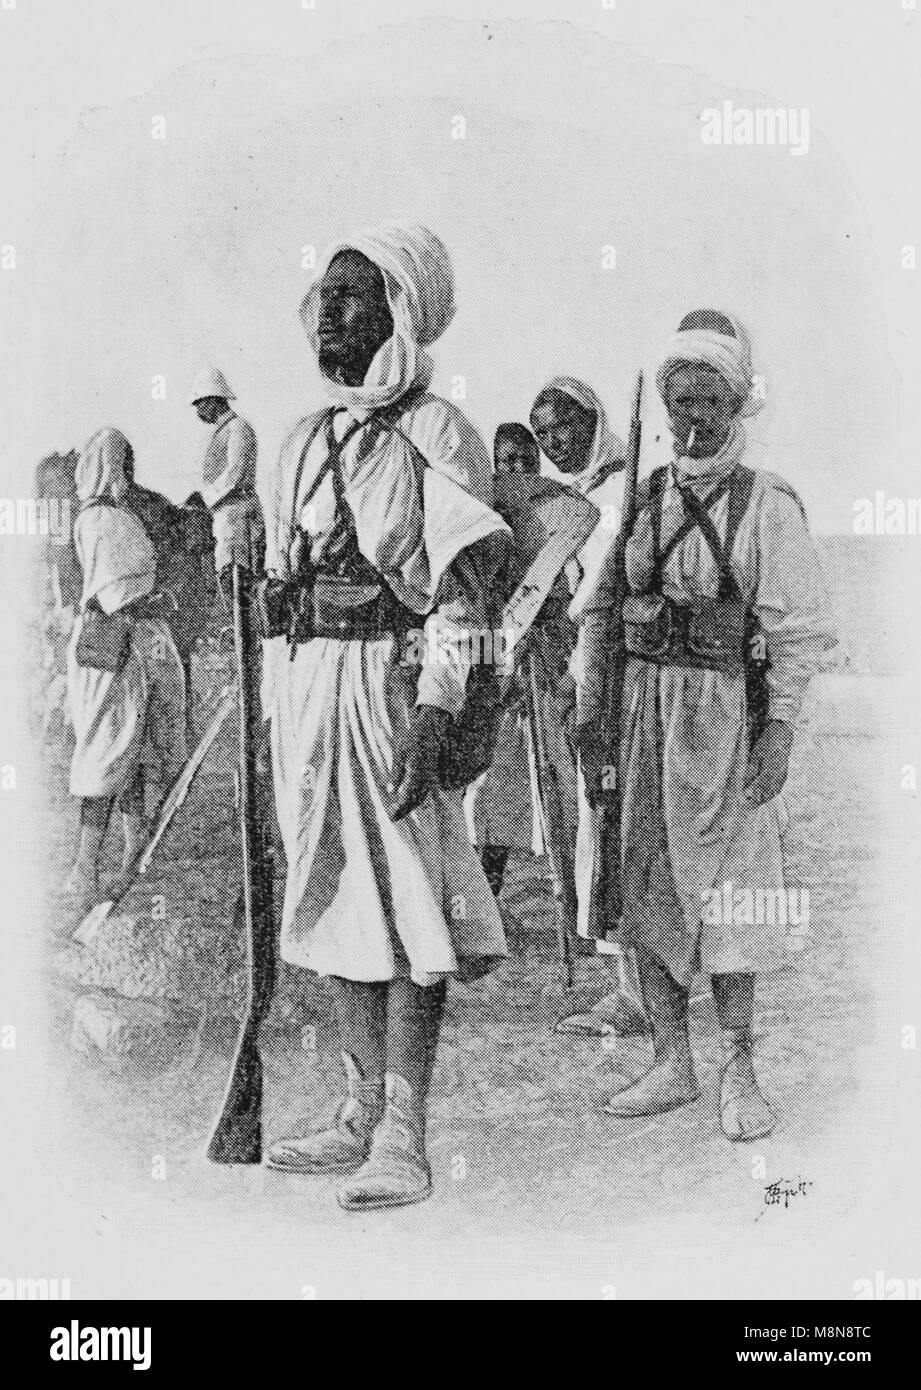 French Foureau-Lamy expedition in Chad in 1900, Targui participants, Picture from the French weekly newspaper l'Illustration, 9th September 1900 Stock Photo